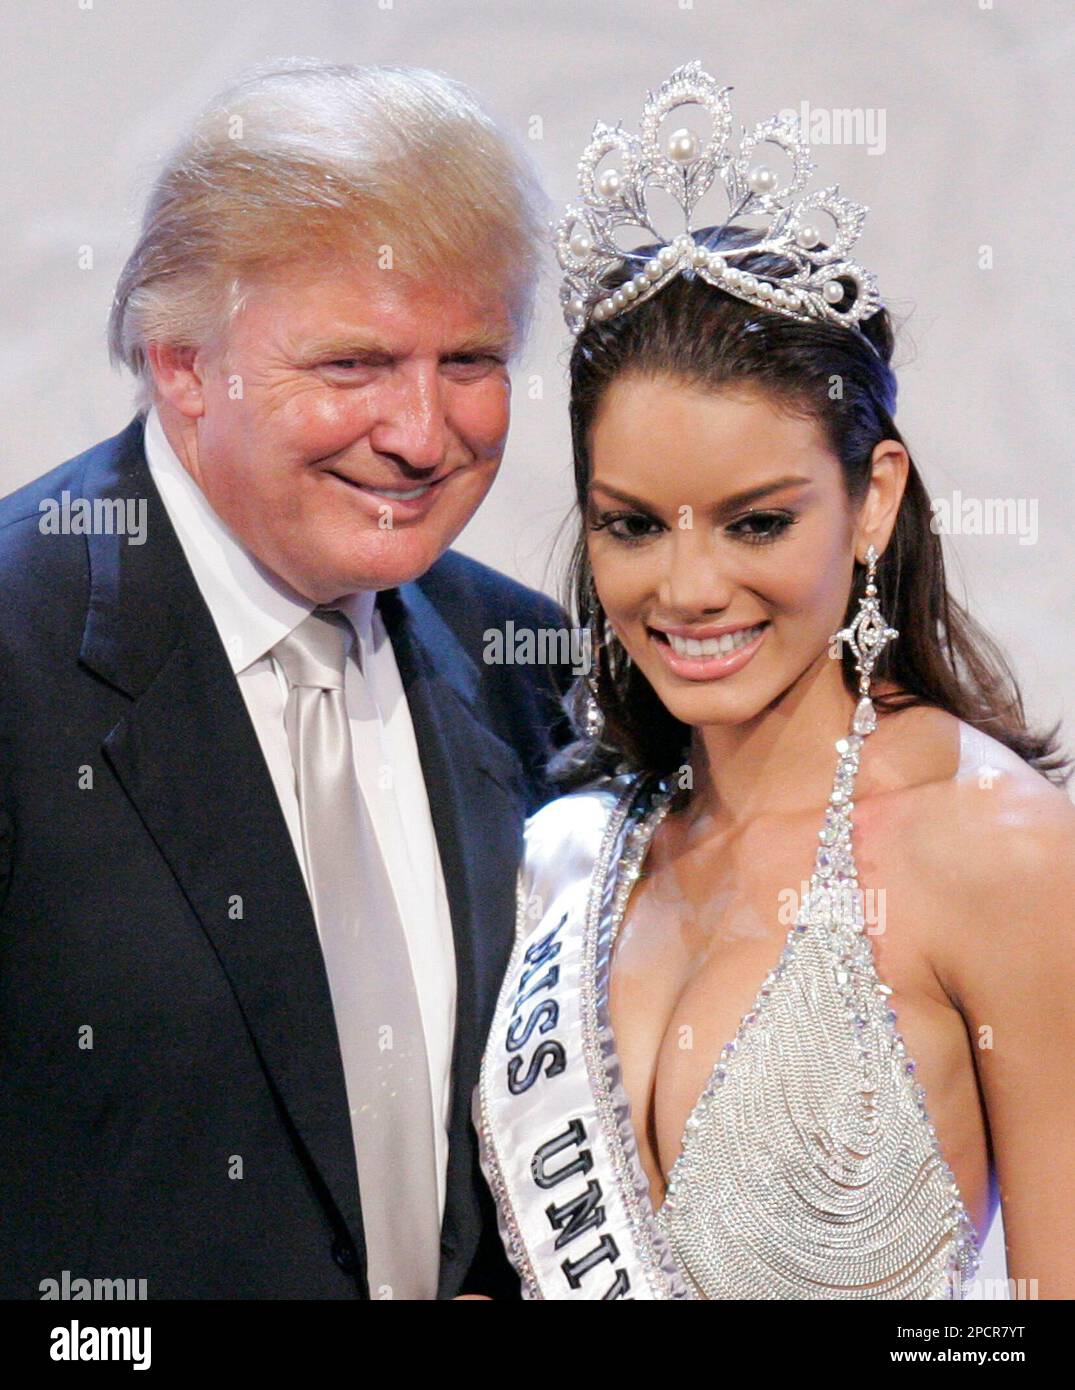 Donald Trump, left, poses with Zuleyka Rivera Mendoza, Miss Puerto Rico 2006, after winning the Miss Universe 2006 pageant on Sunday, July 23, 2006, in Los Angeles. (AP Photo/Mark J. Terrill) Stock Photo